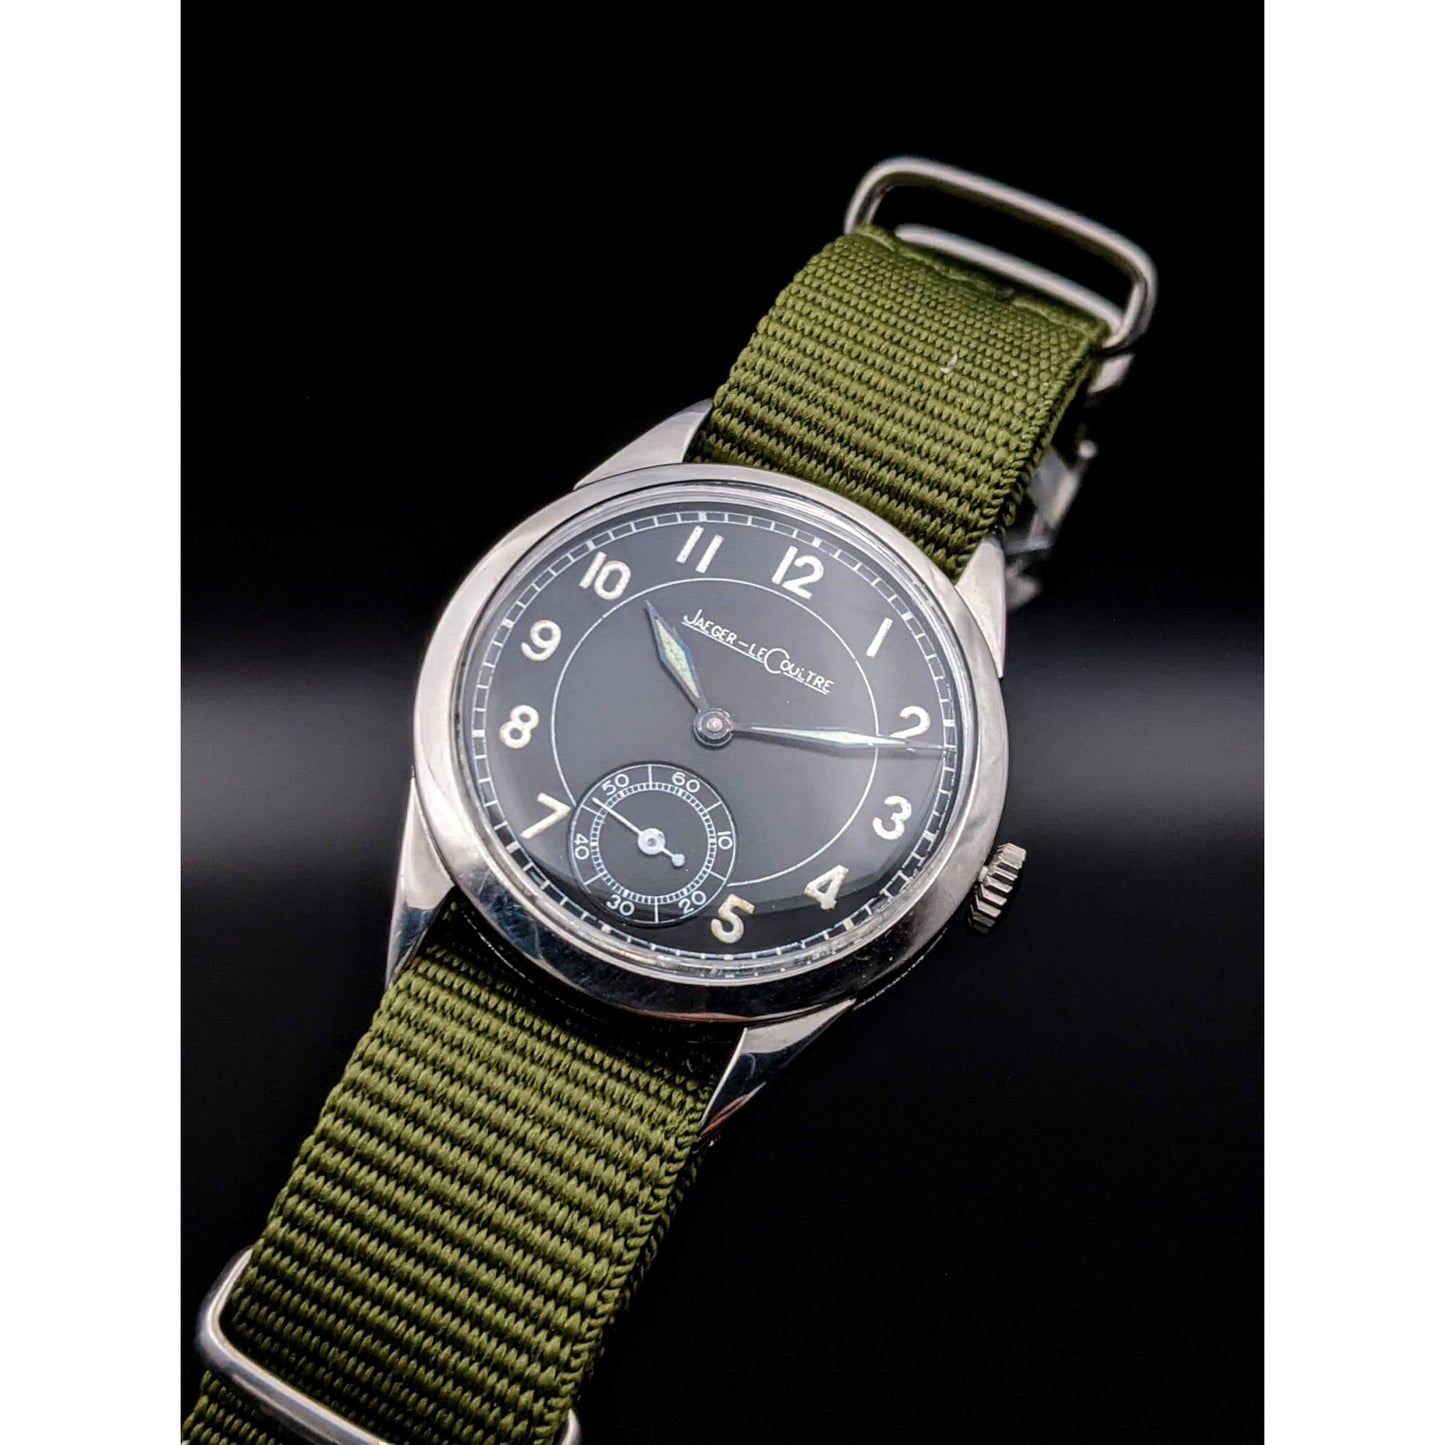 Jaeger-LeCoultre Military WWII watch / Vintage 1940's / Serviced - E-V-W.com